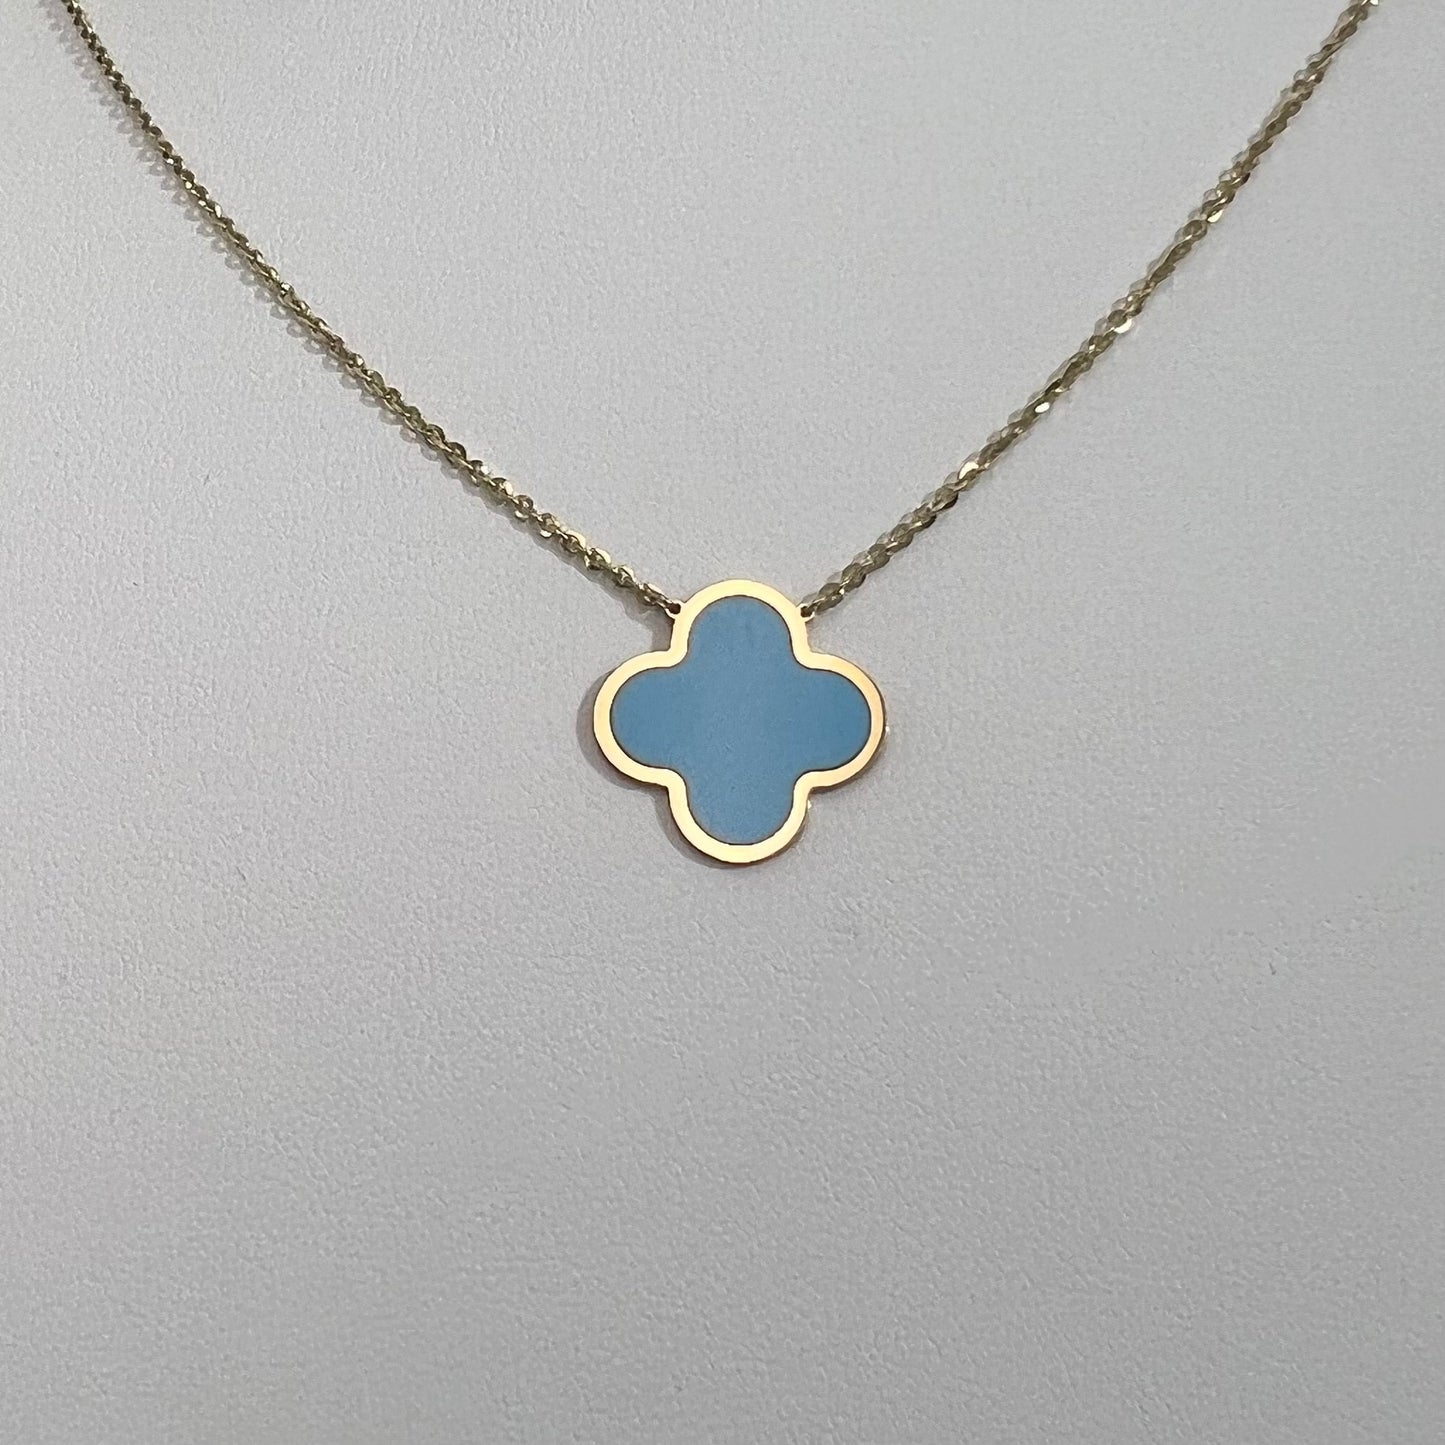 14k Gold Clover Necklace, Turquoise